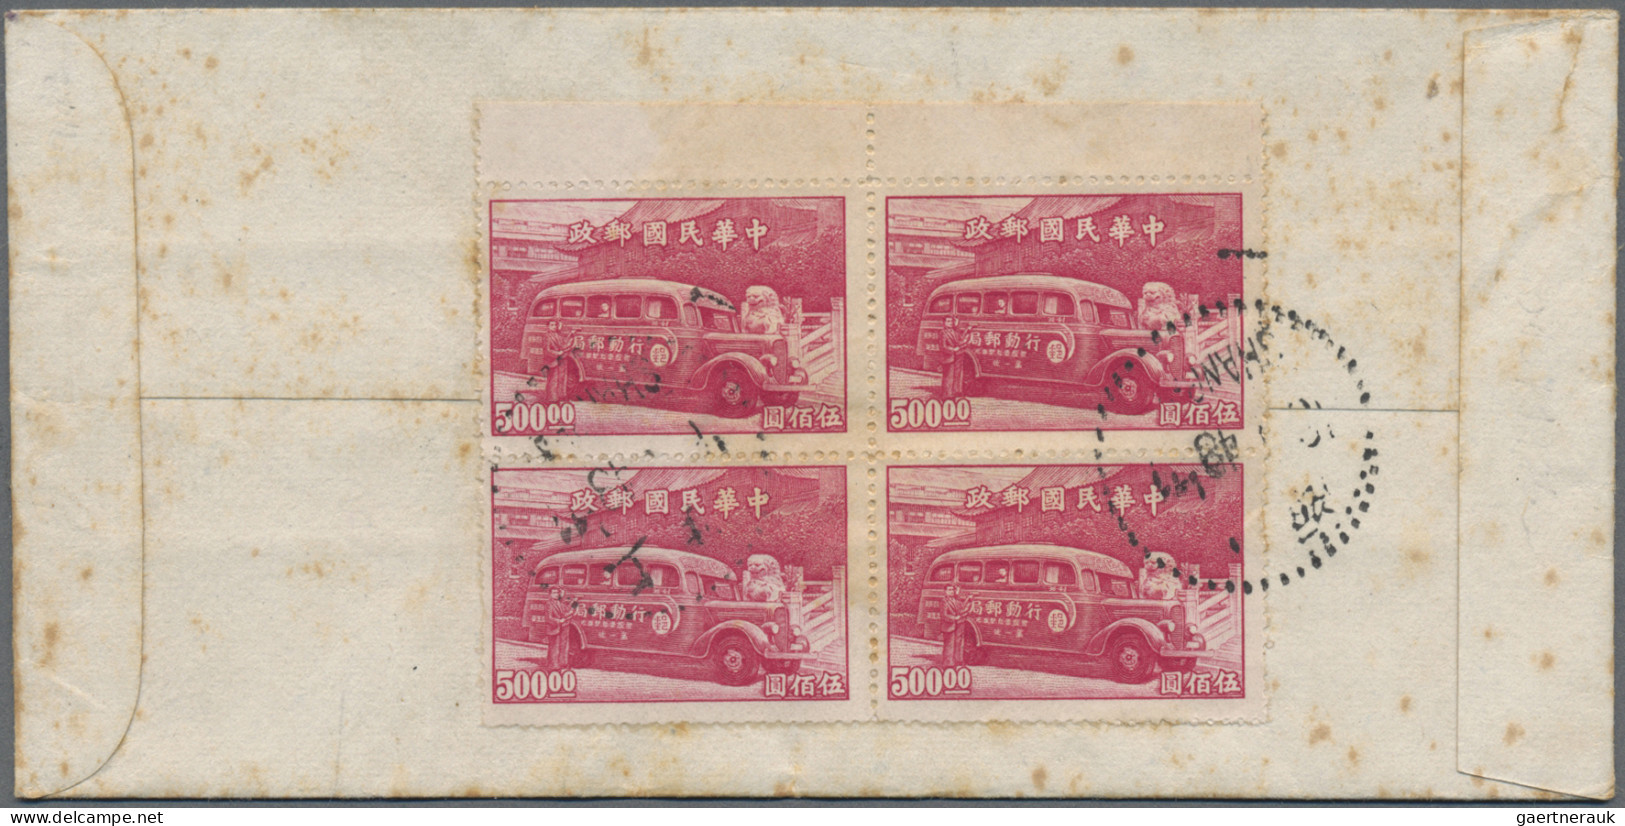 China: 1947/1948, covers (11+ one front) with commemoratives used foreign inc. r